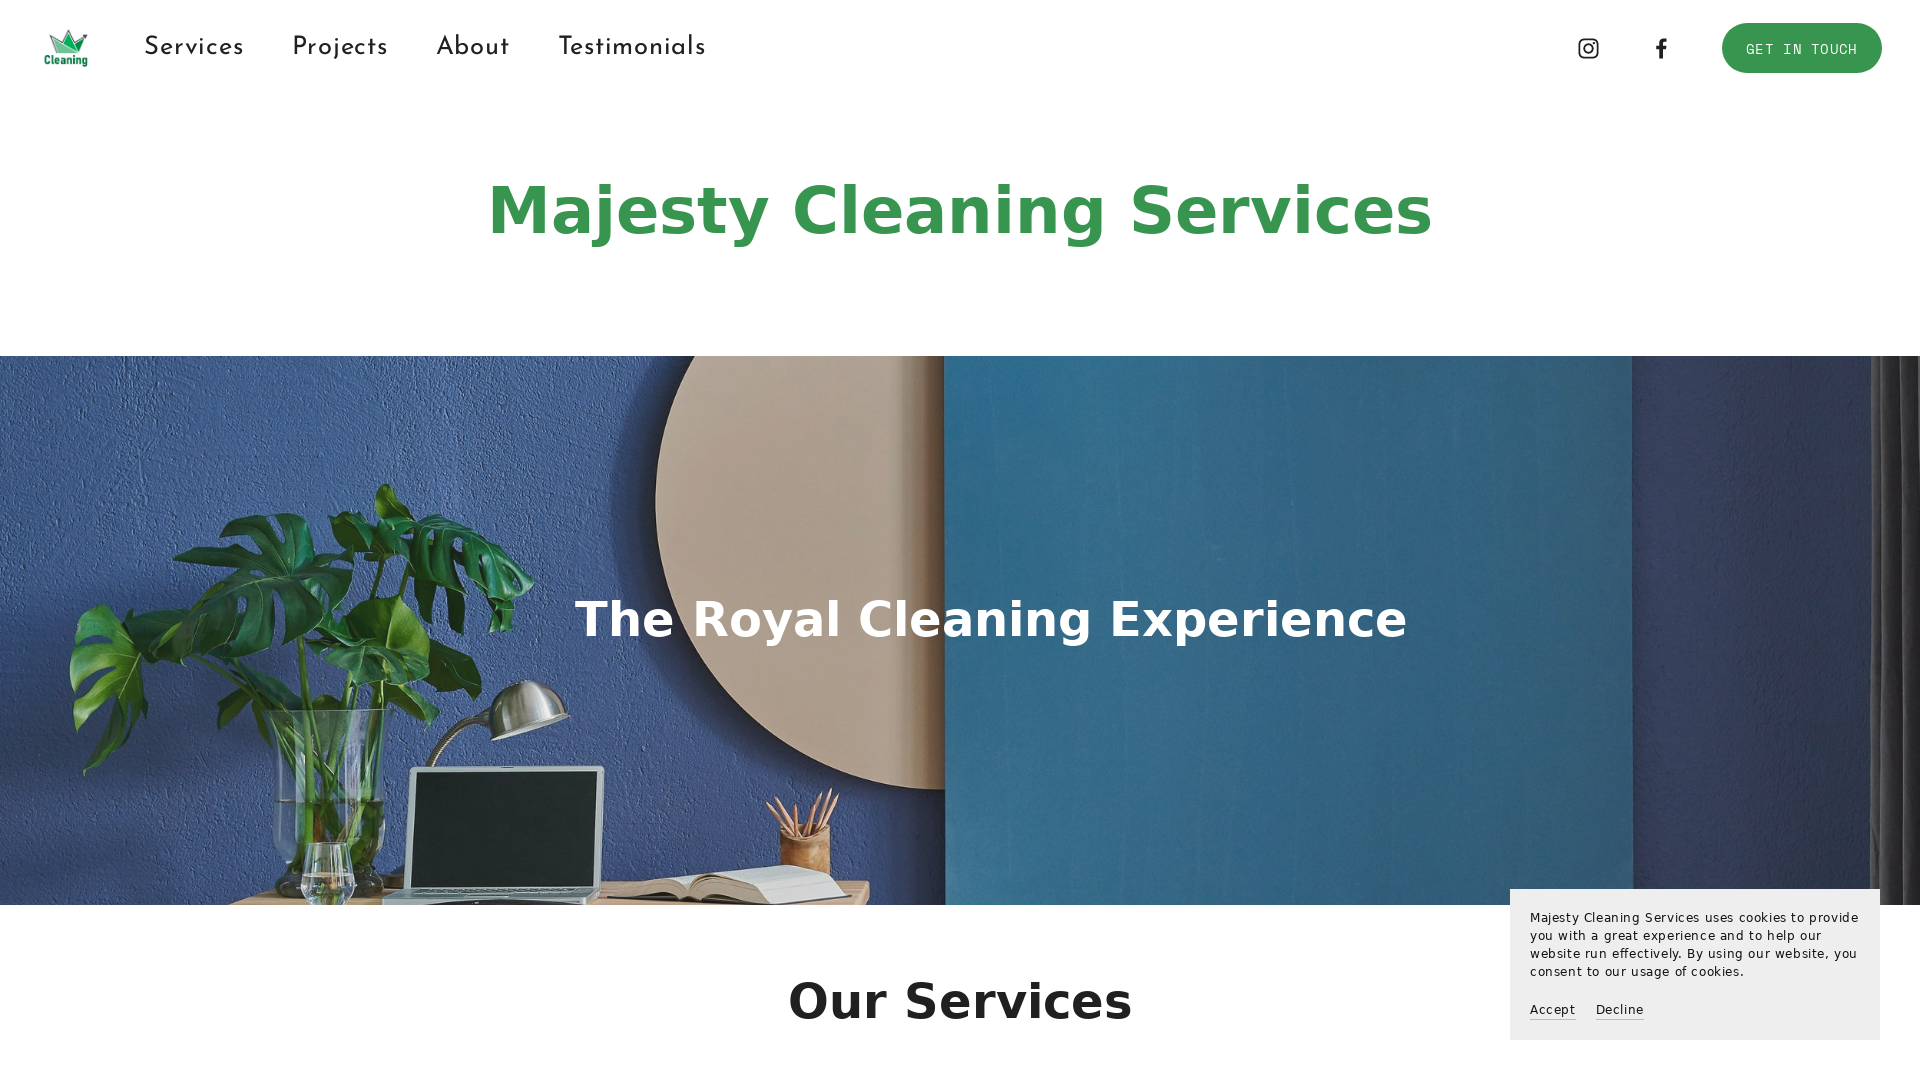 Majesty Cleaning Services